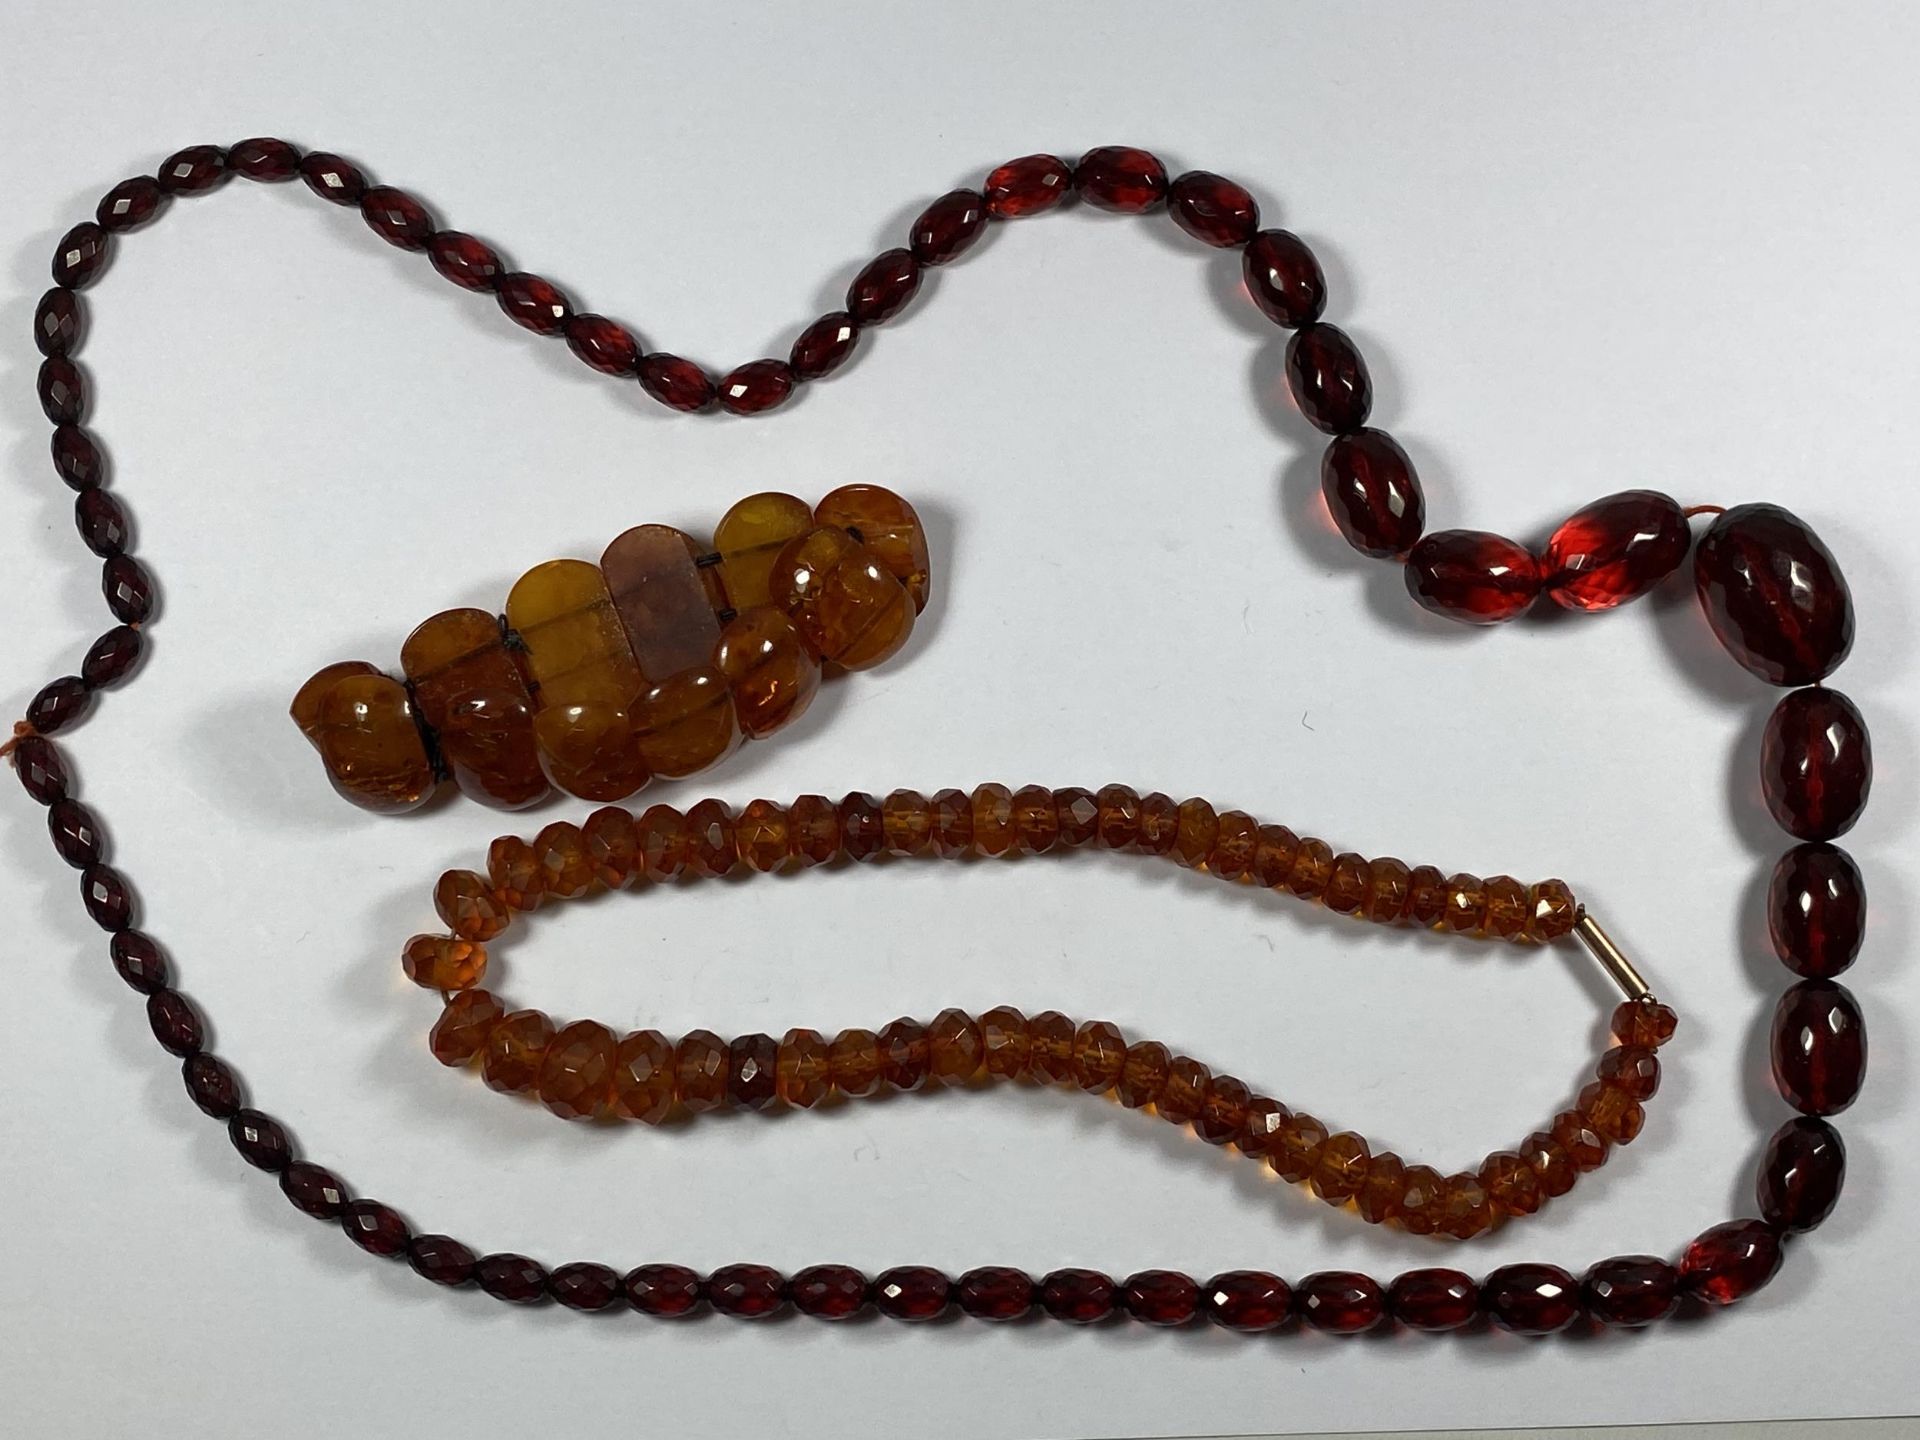 THREE BEADED ITEMS - RED GLASS NECKLACE, AMBER EFFECT BRACELET AND NECKLACE